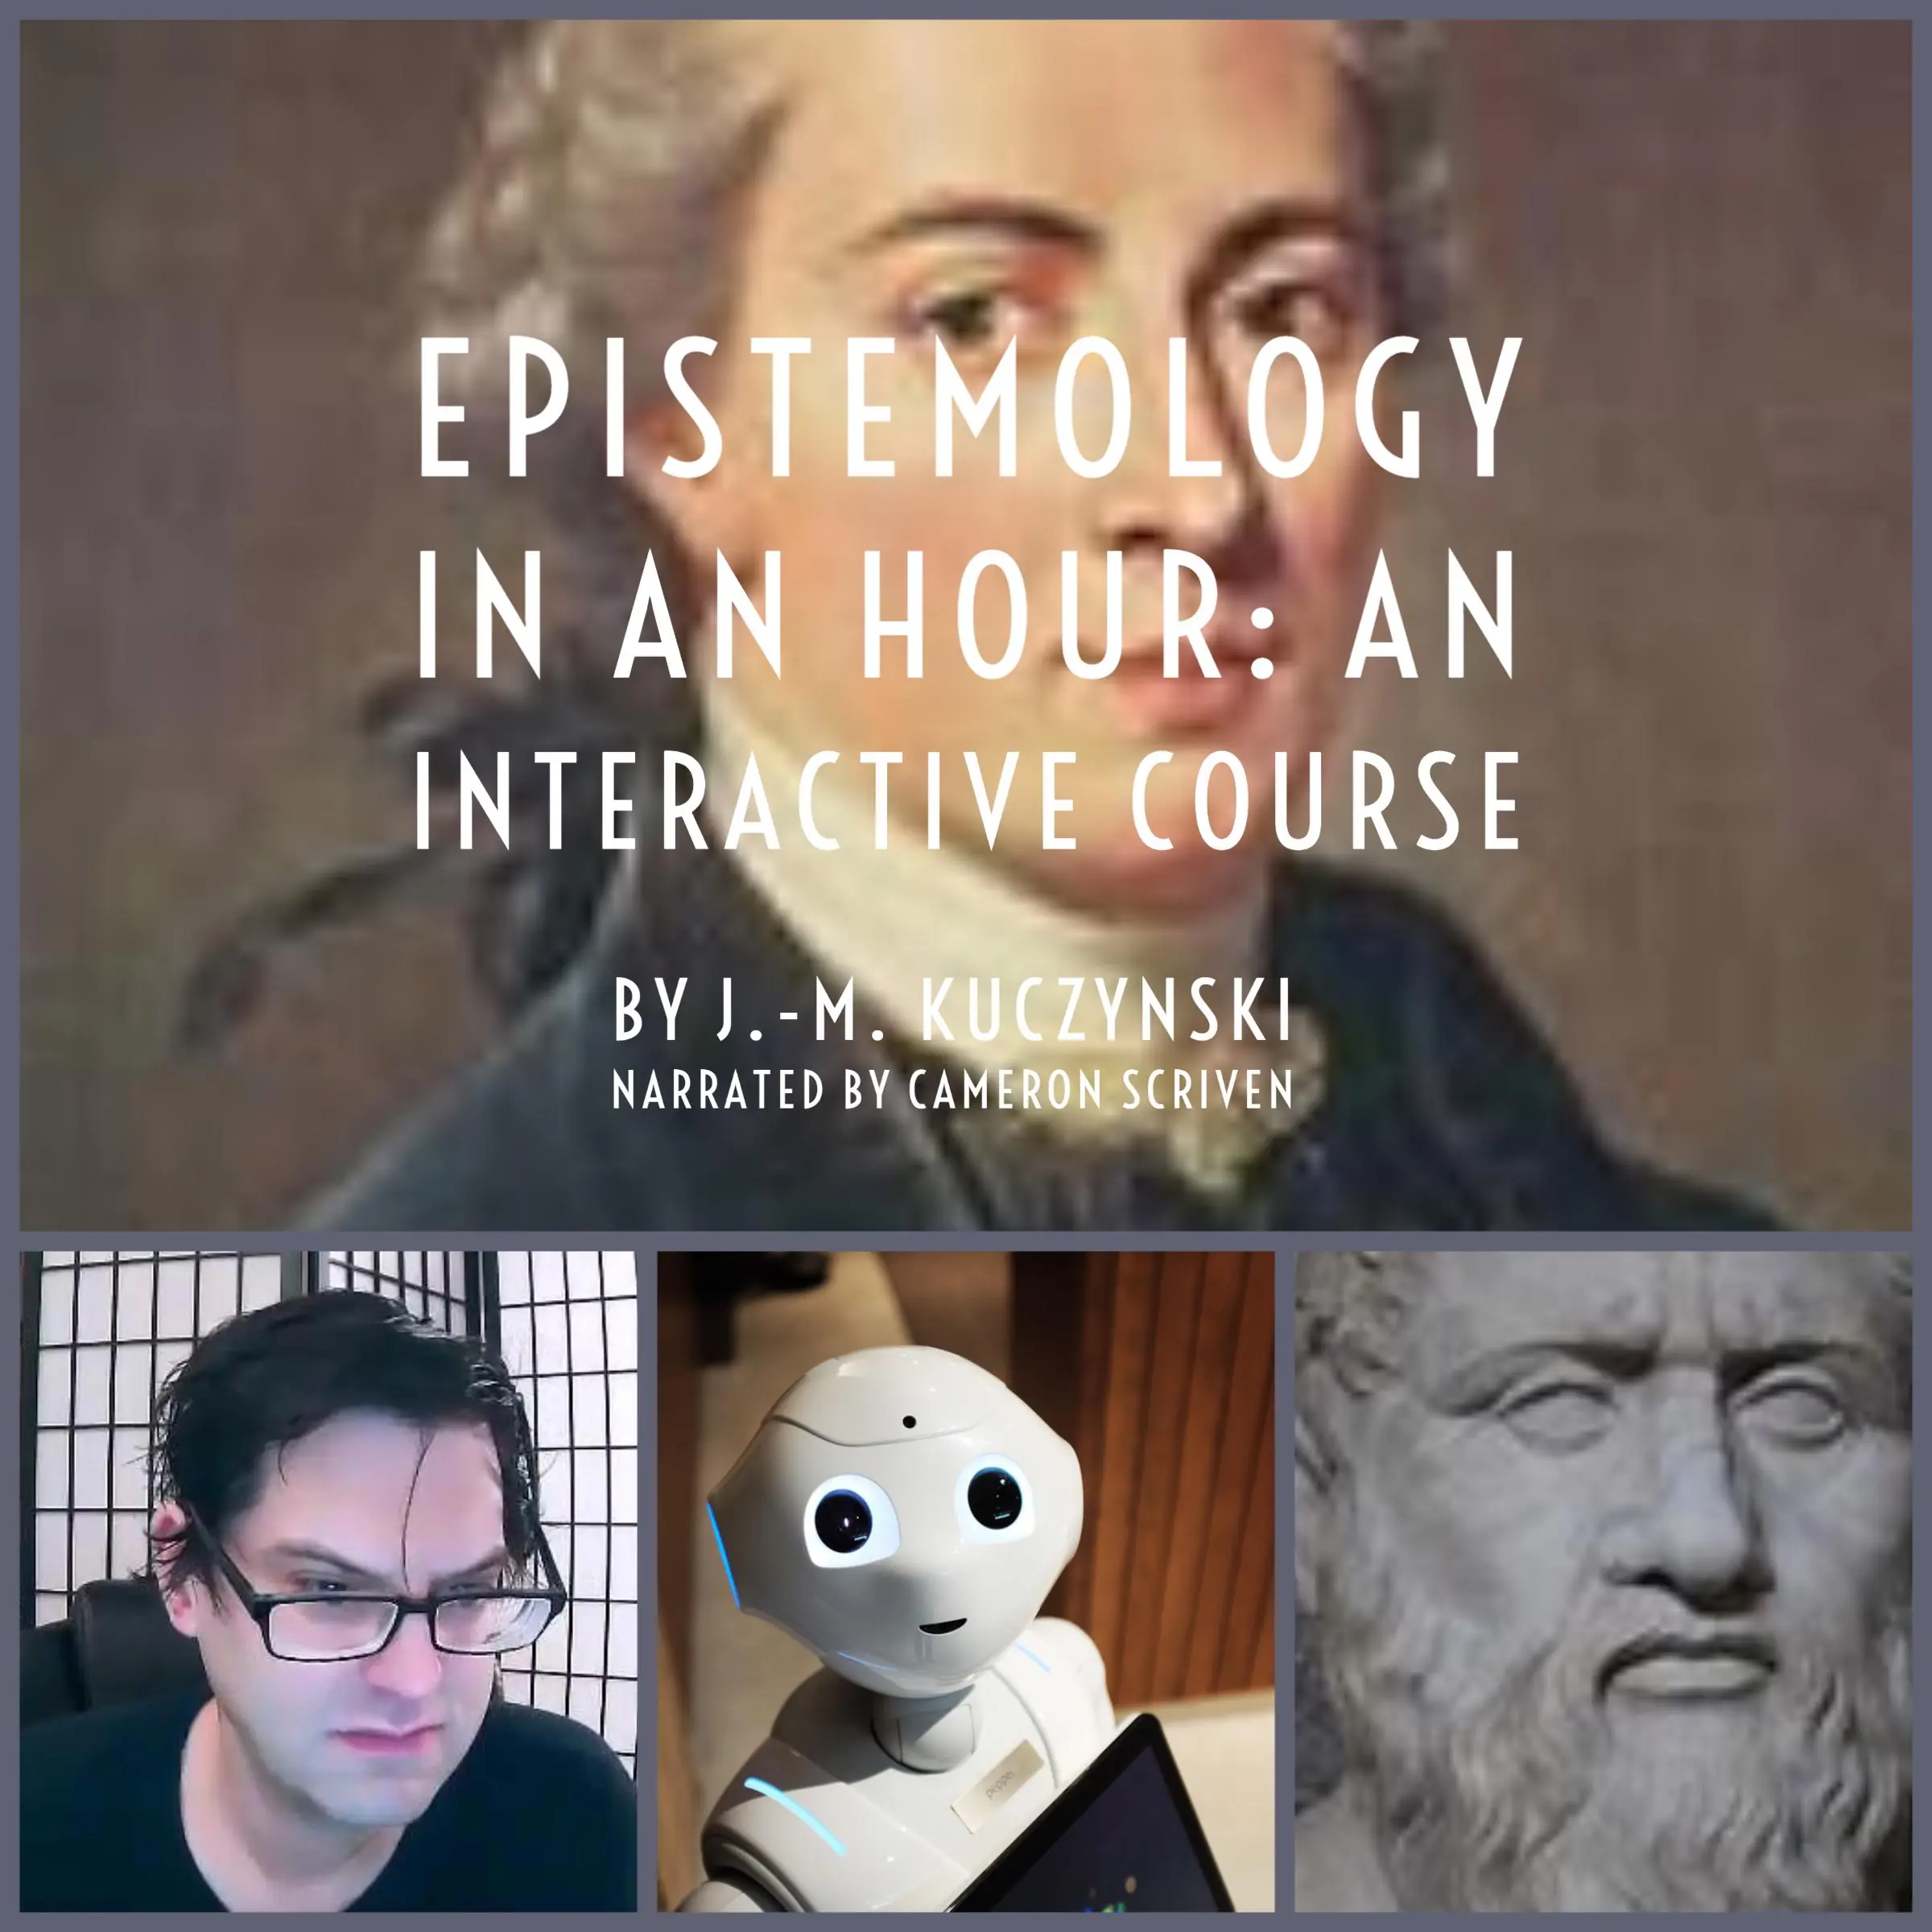 Epistemology in an Hour: An Interactive Course Audiobook by J.-M. Kuczynski